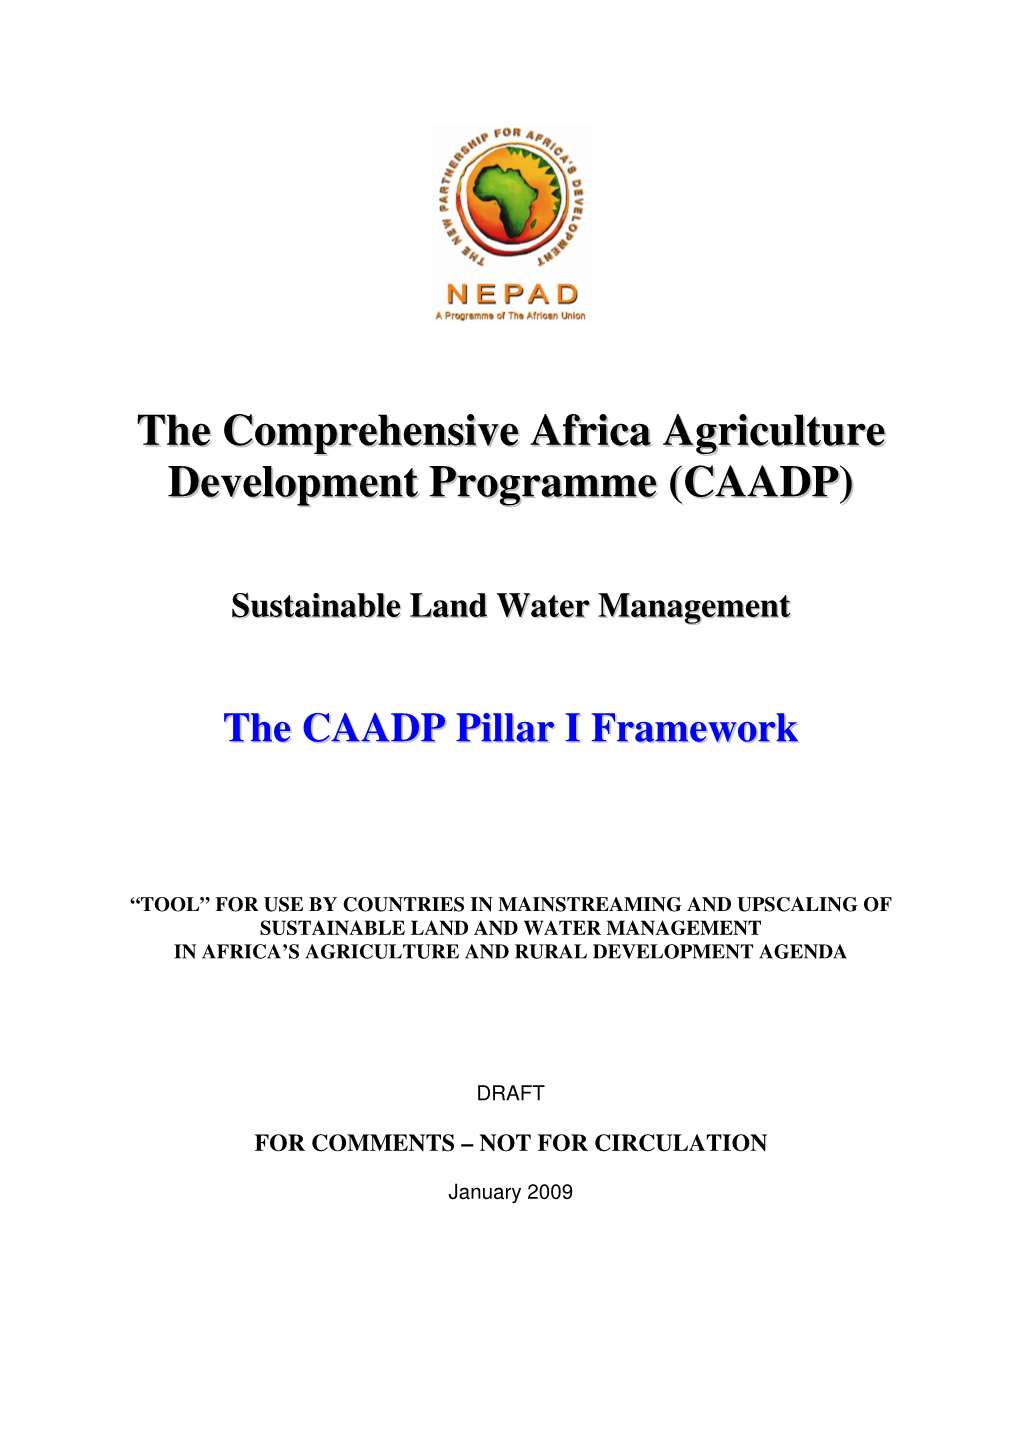 The Comprehensive Africa Agriculture Development Programme (CAADP)